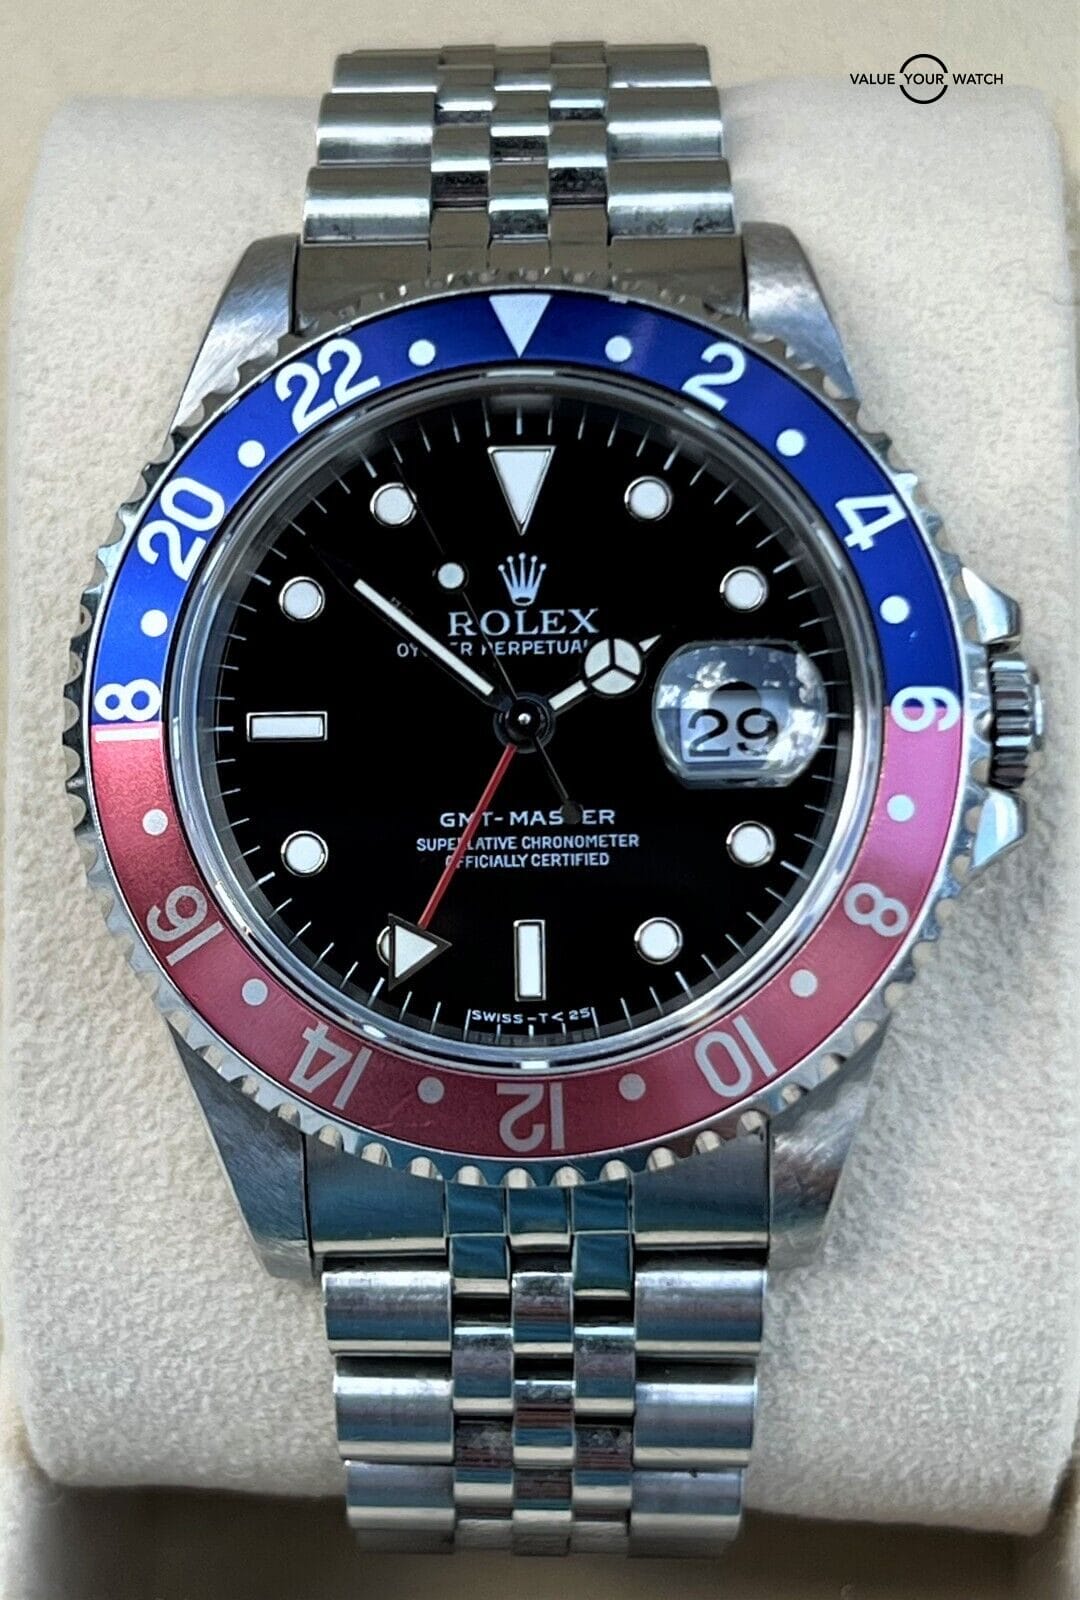 1996 Rolex GMT 16700 40mm PEPSI BOXES/PAPERS! | Value Your Watch